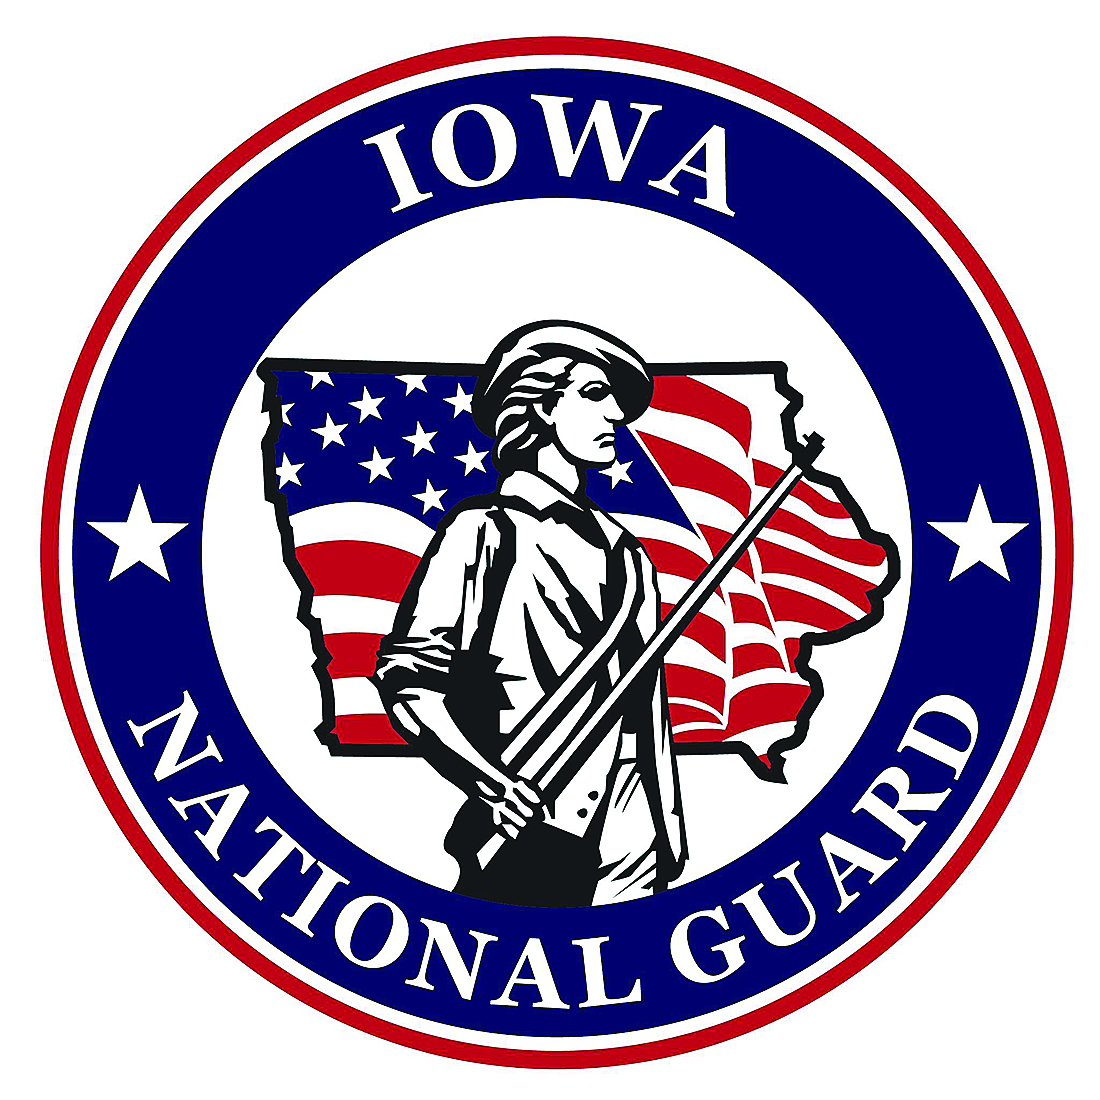 National Guard deployments, including from Charles City armory, to go forward